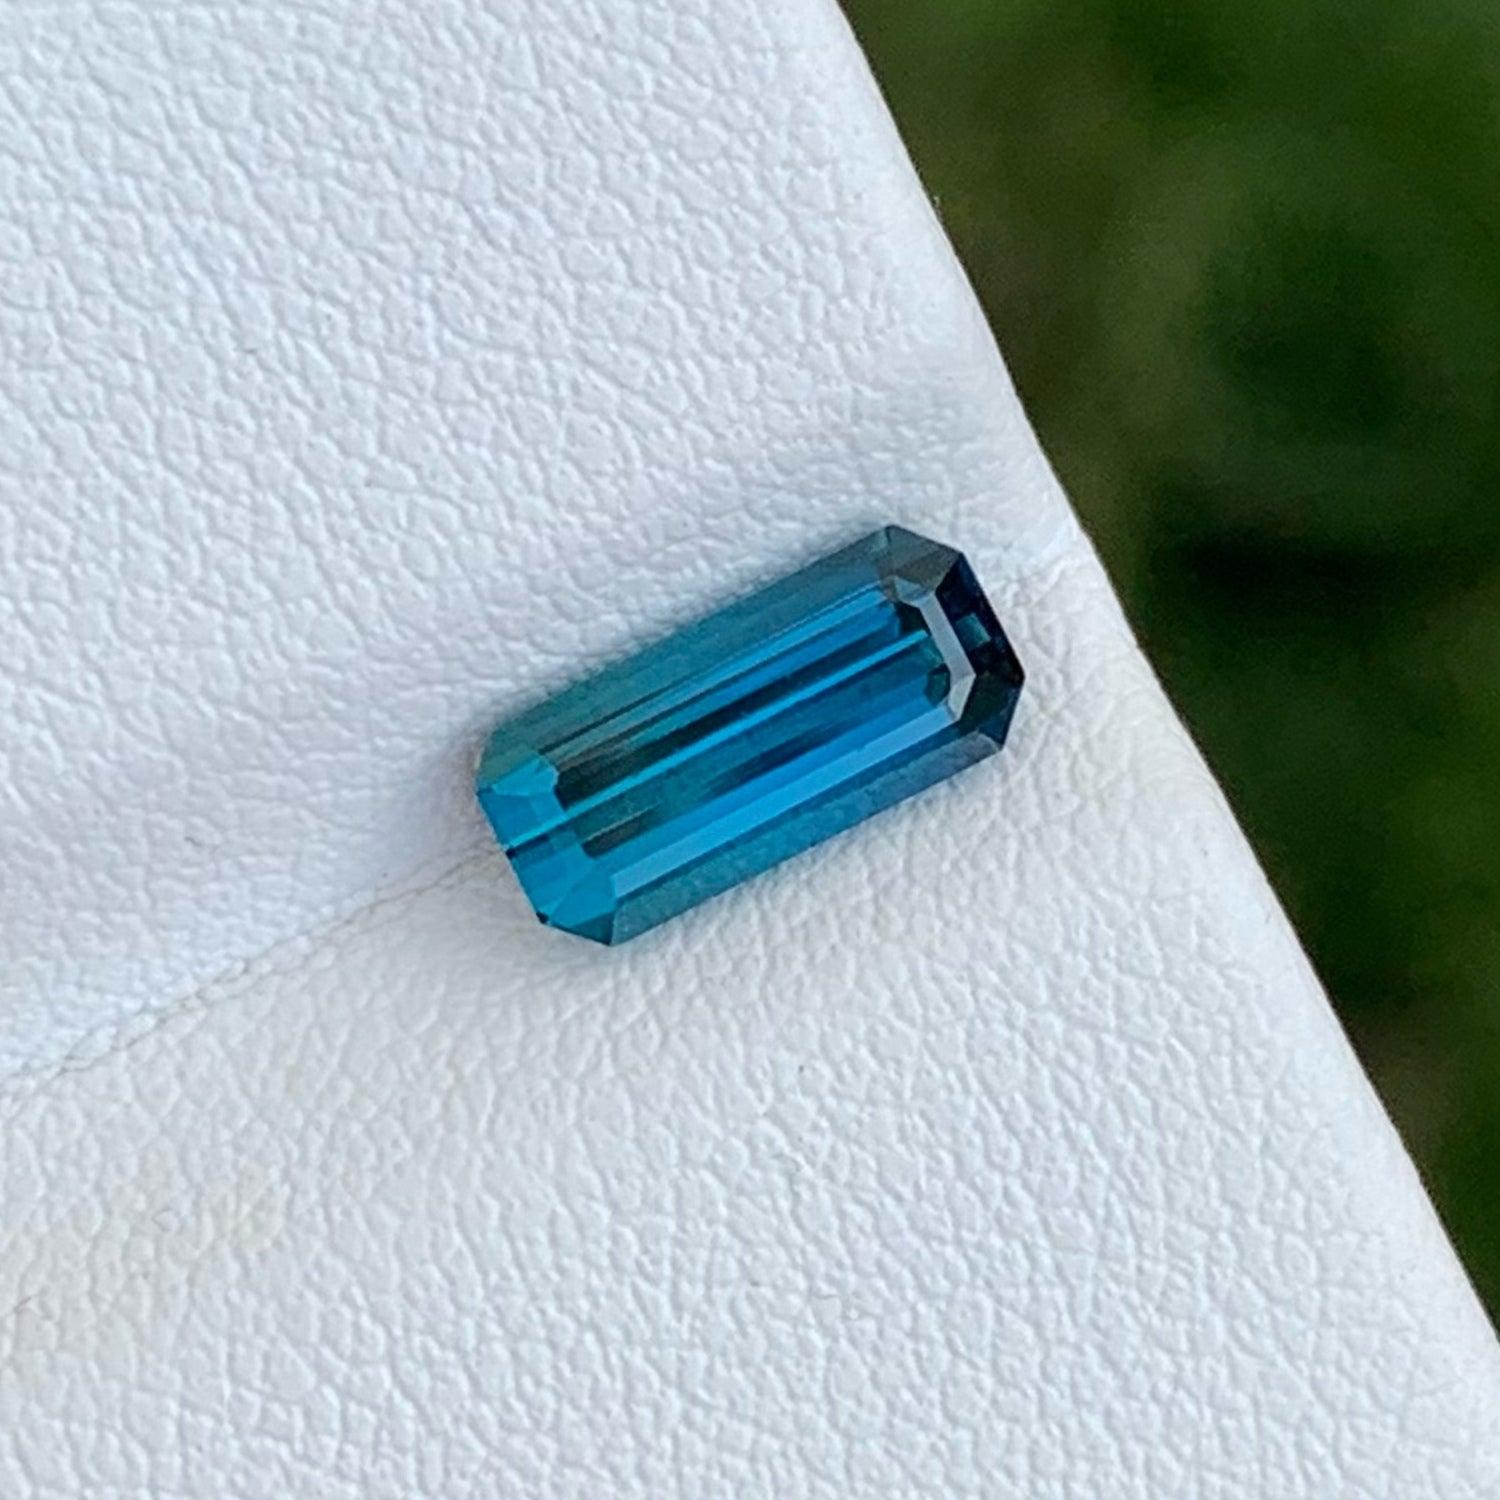 Natural Ink Blue Tourmaline For Jewelry, available For Sale At Wholesale Price Natural High Quality 1.35 Carats Loupe Clean Clarity Natural Loose Tourmaline From Afghanistan. 
Informations sur le produit :
NOM DE LA PIERRE PRÉCIEUSE : Tourmaline